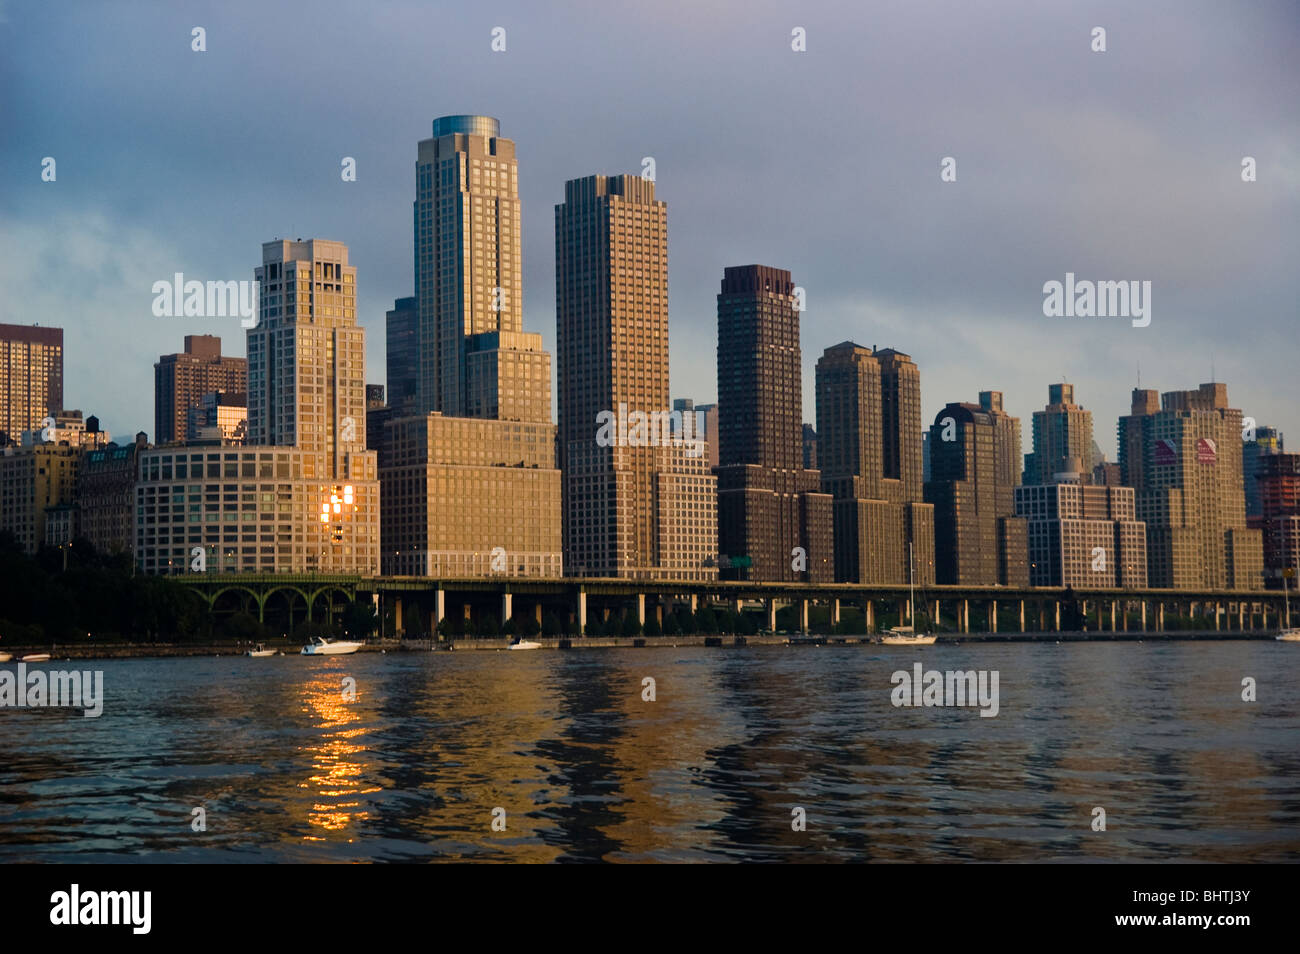 Looking back at the Upper West Side from the Hudson River, Manhattan, NY. Stock Photo